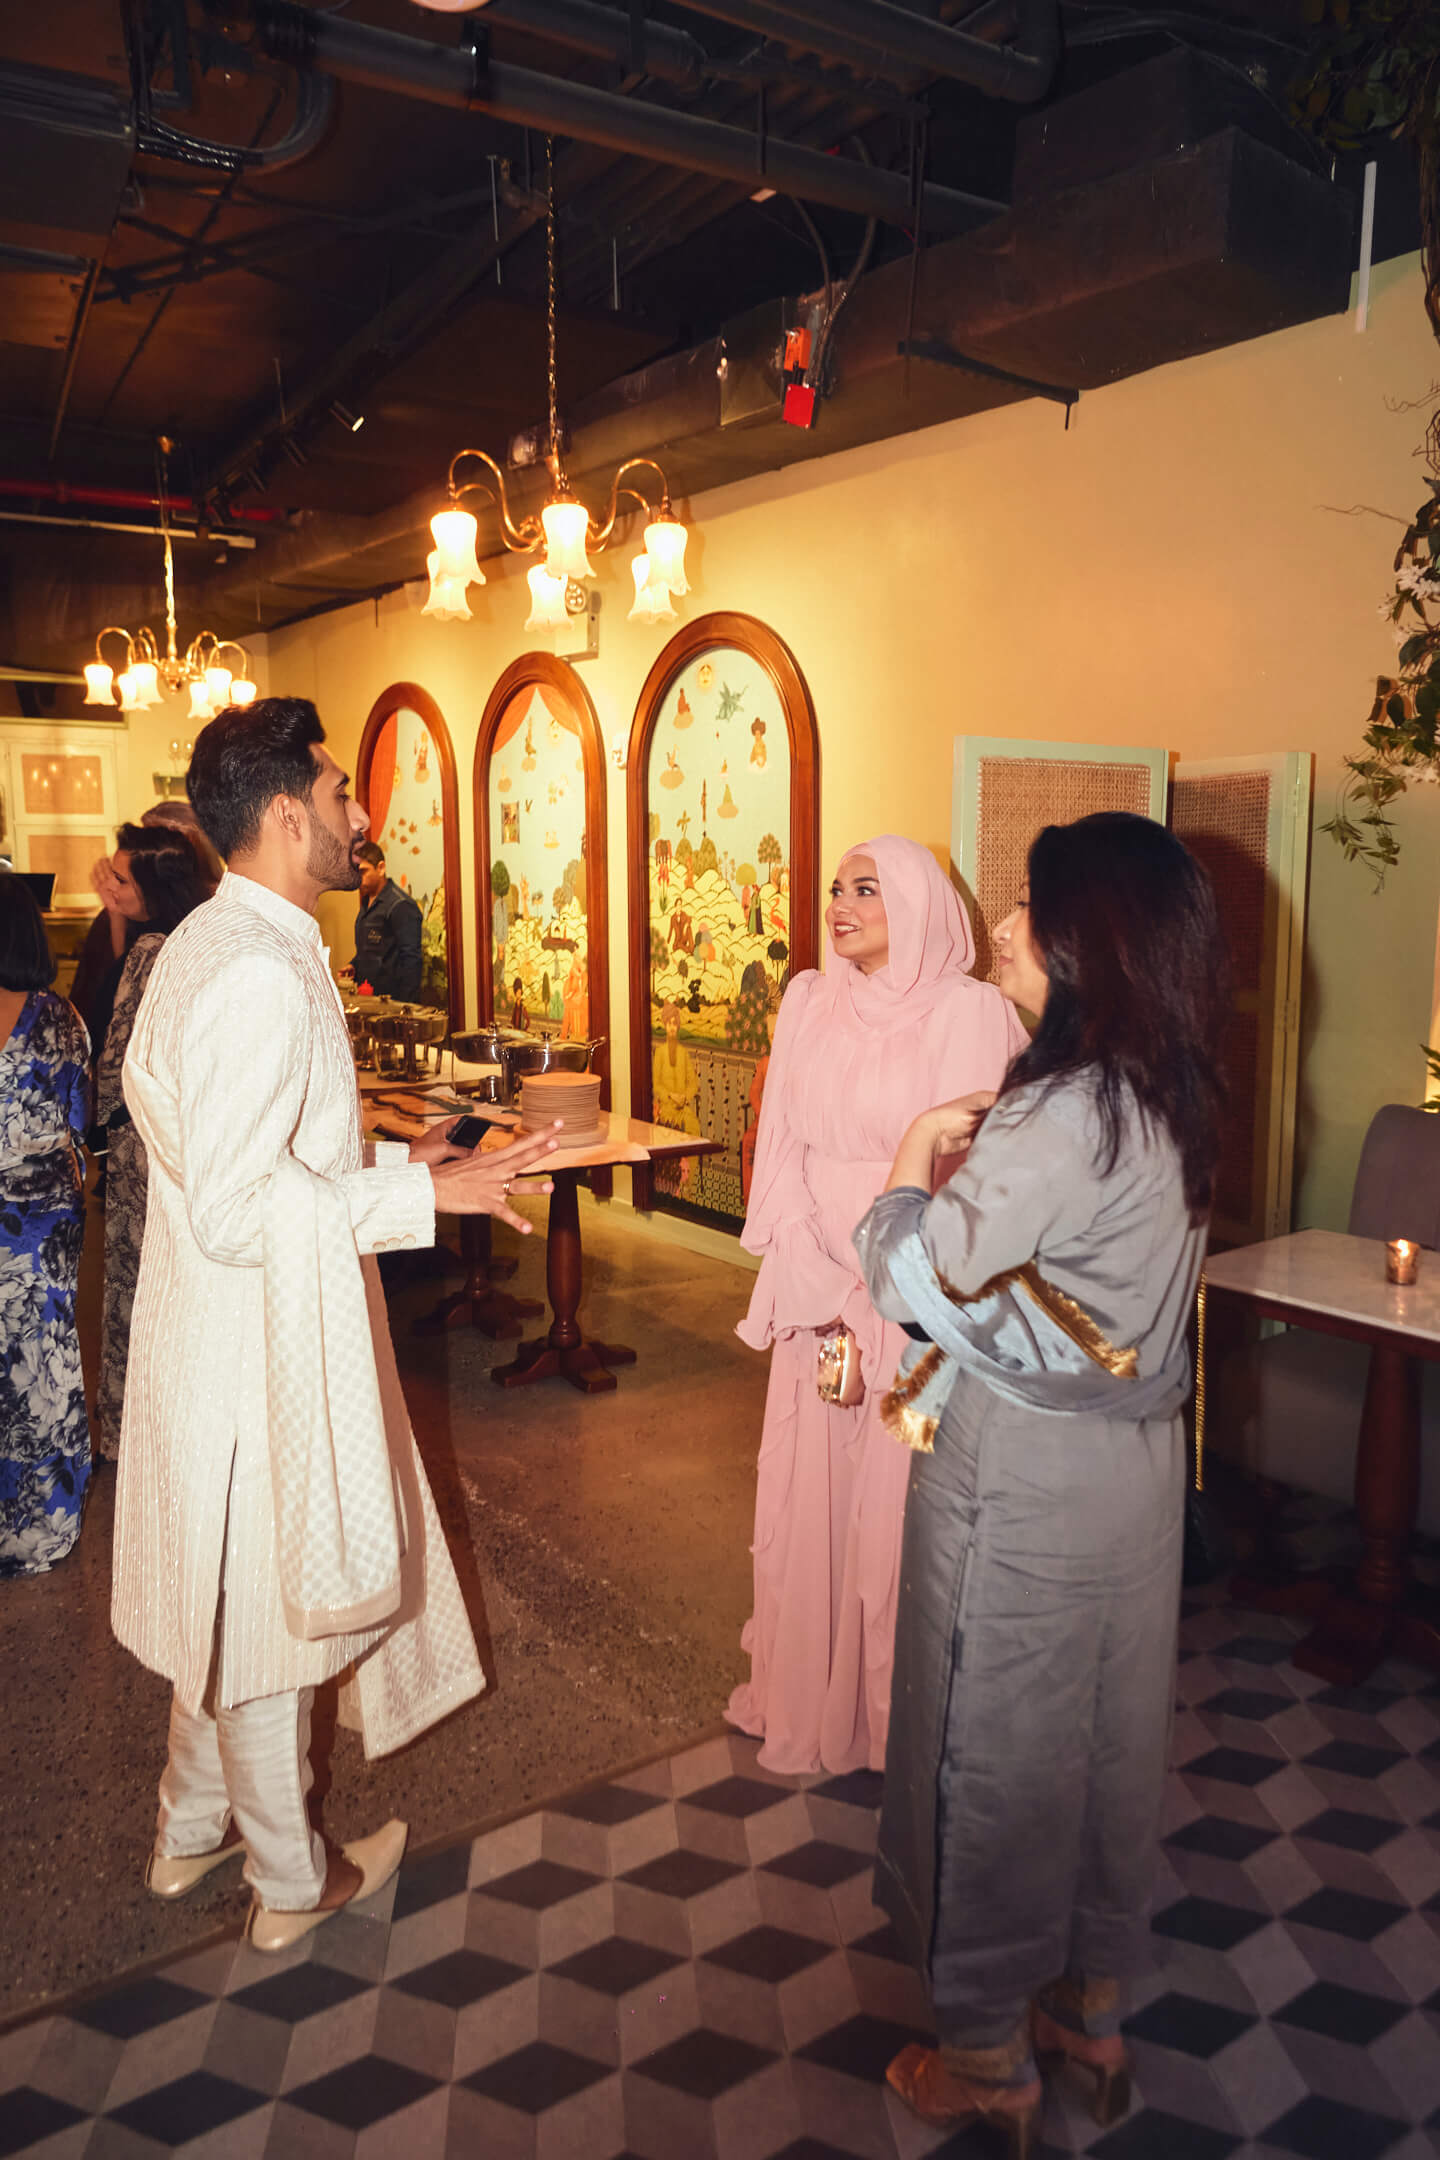 Ramadan Kareem - Iftar by The Zubair Show - 2024 - The Bungalow NYC - Event Photography - Networking Event Photography - Lifestyle Photography 